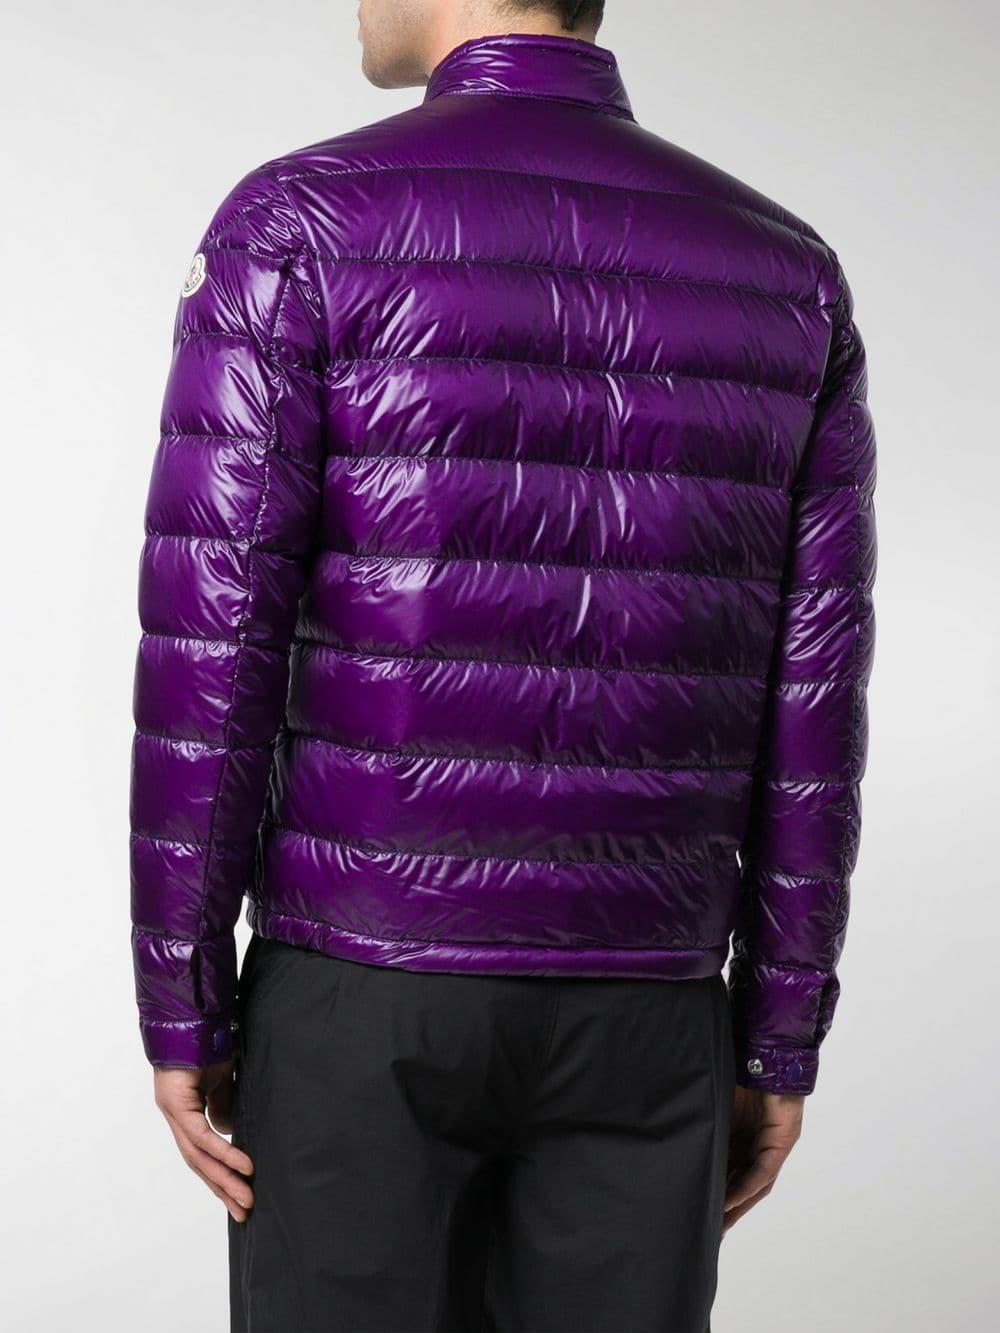 Lyst - Moncler Acorus Padded Jacket in Purple for Men